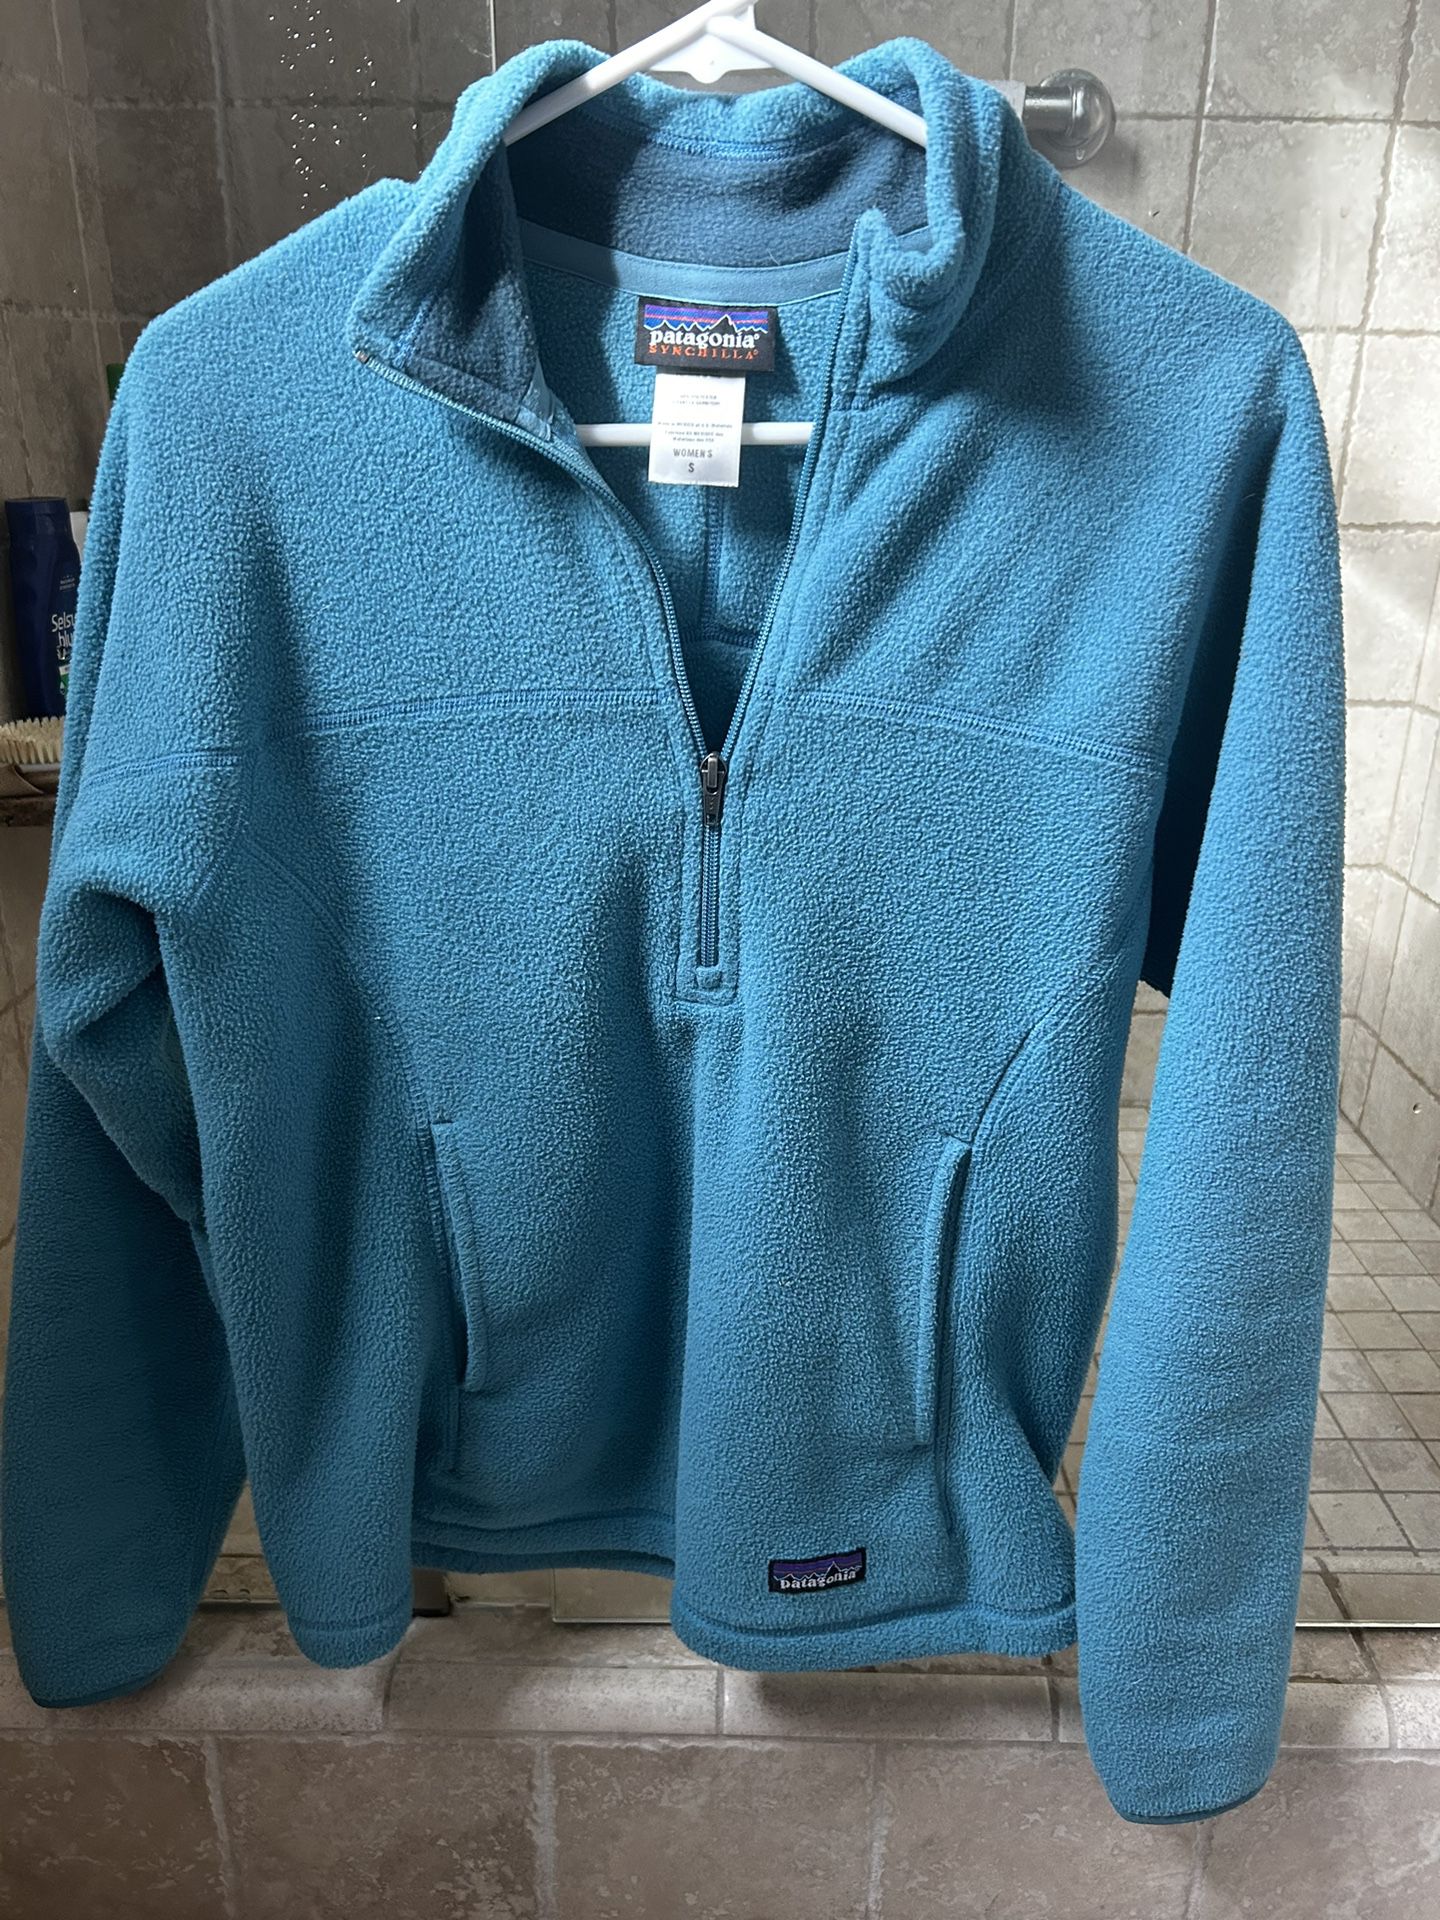 Patagonia Women’s Small Zip Up